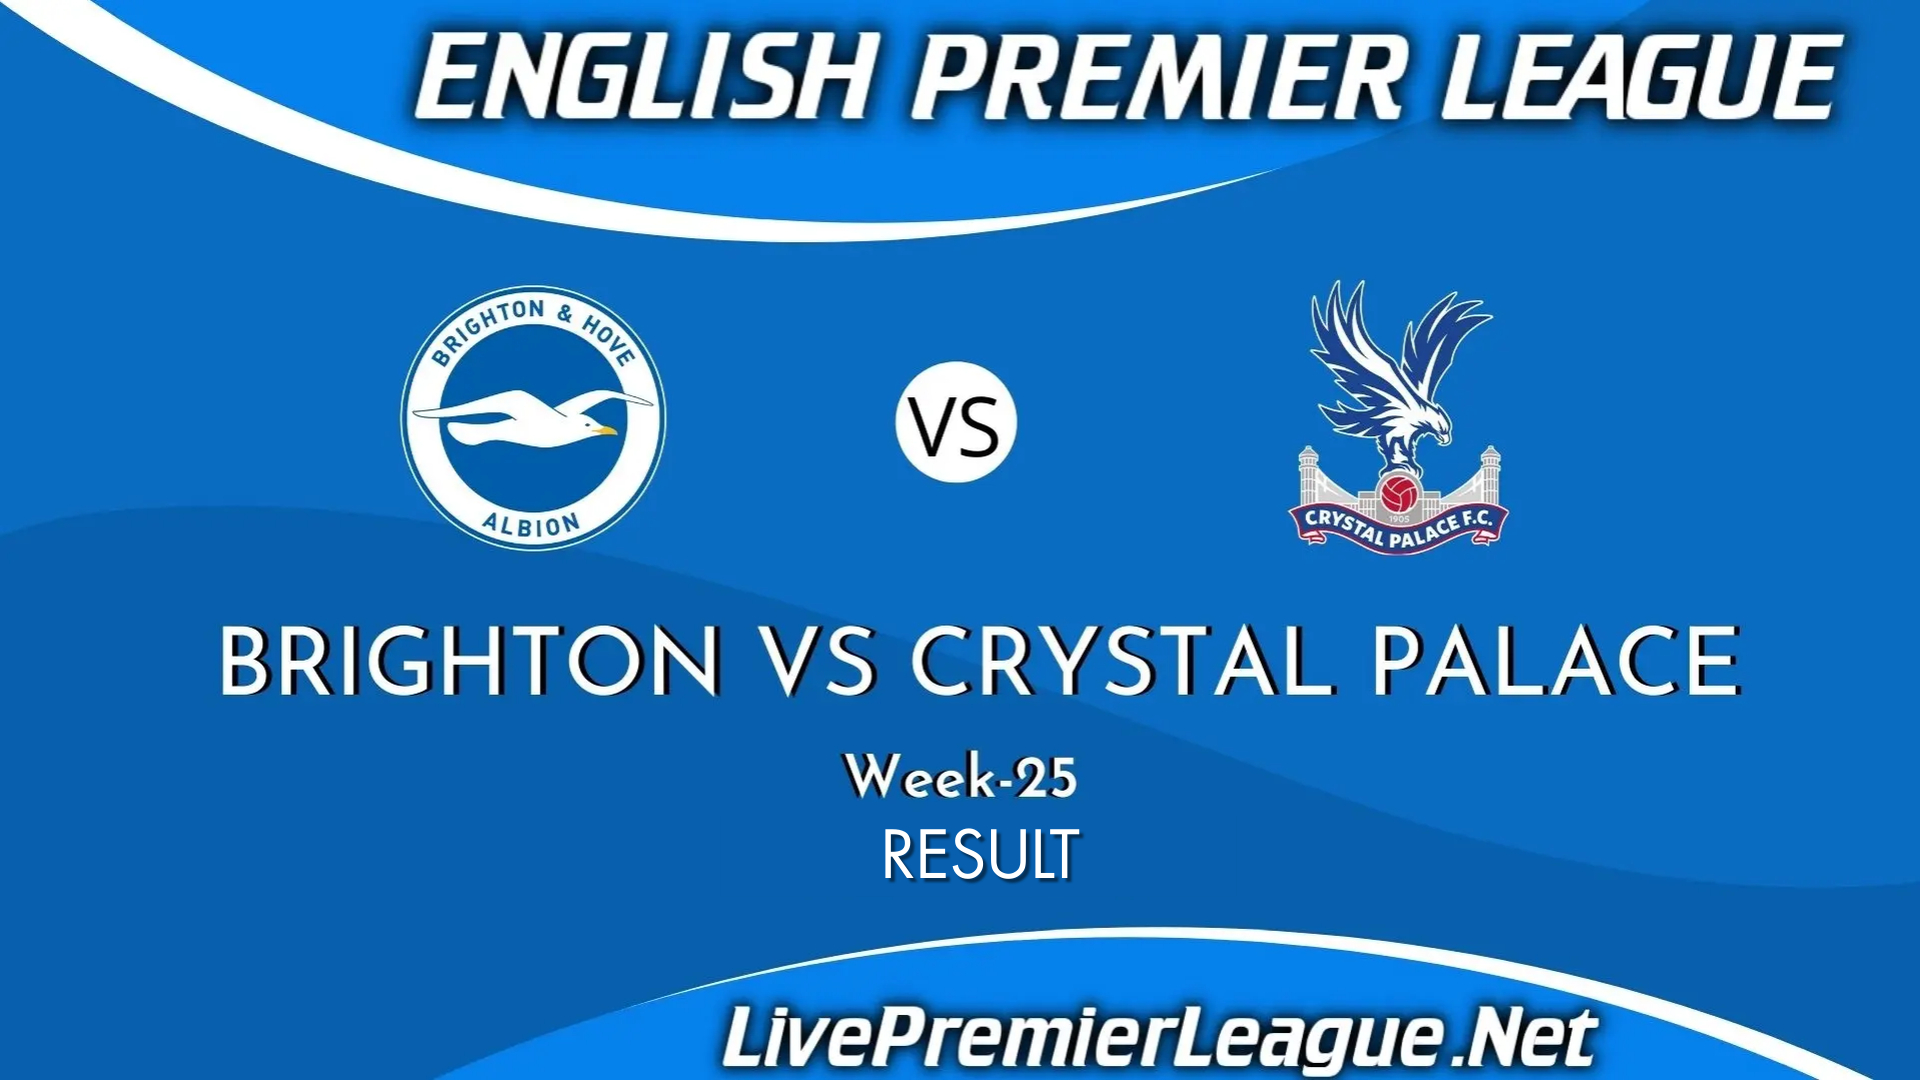 Brighton and Hove Albion Vs Crystal Palace | Result 2021 EPL Week 25